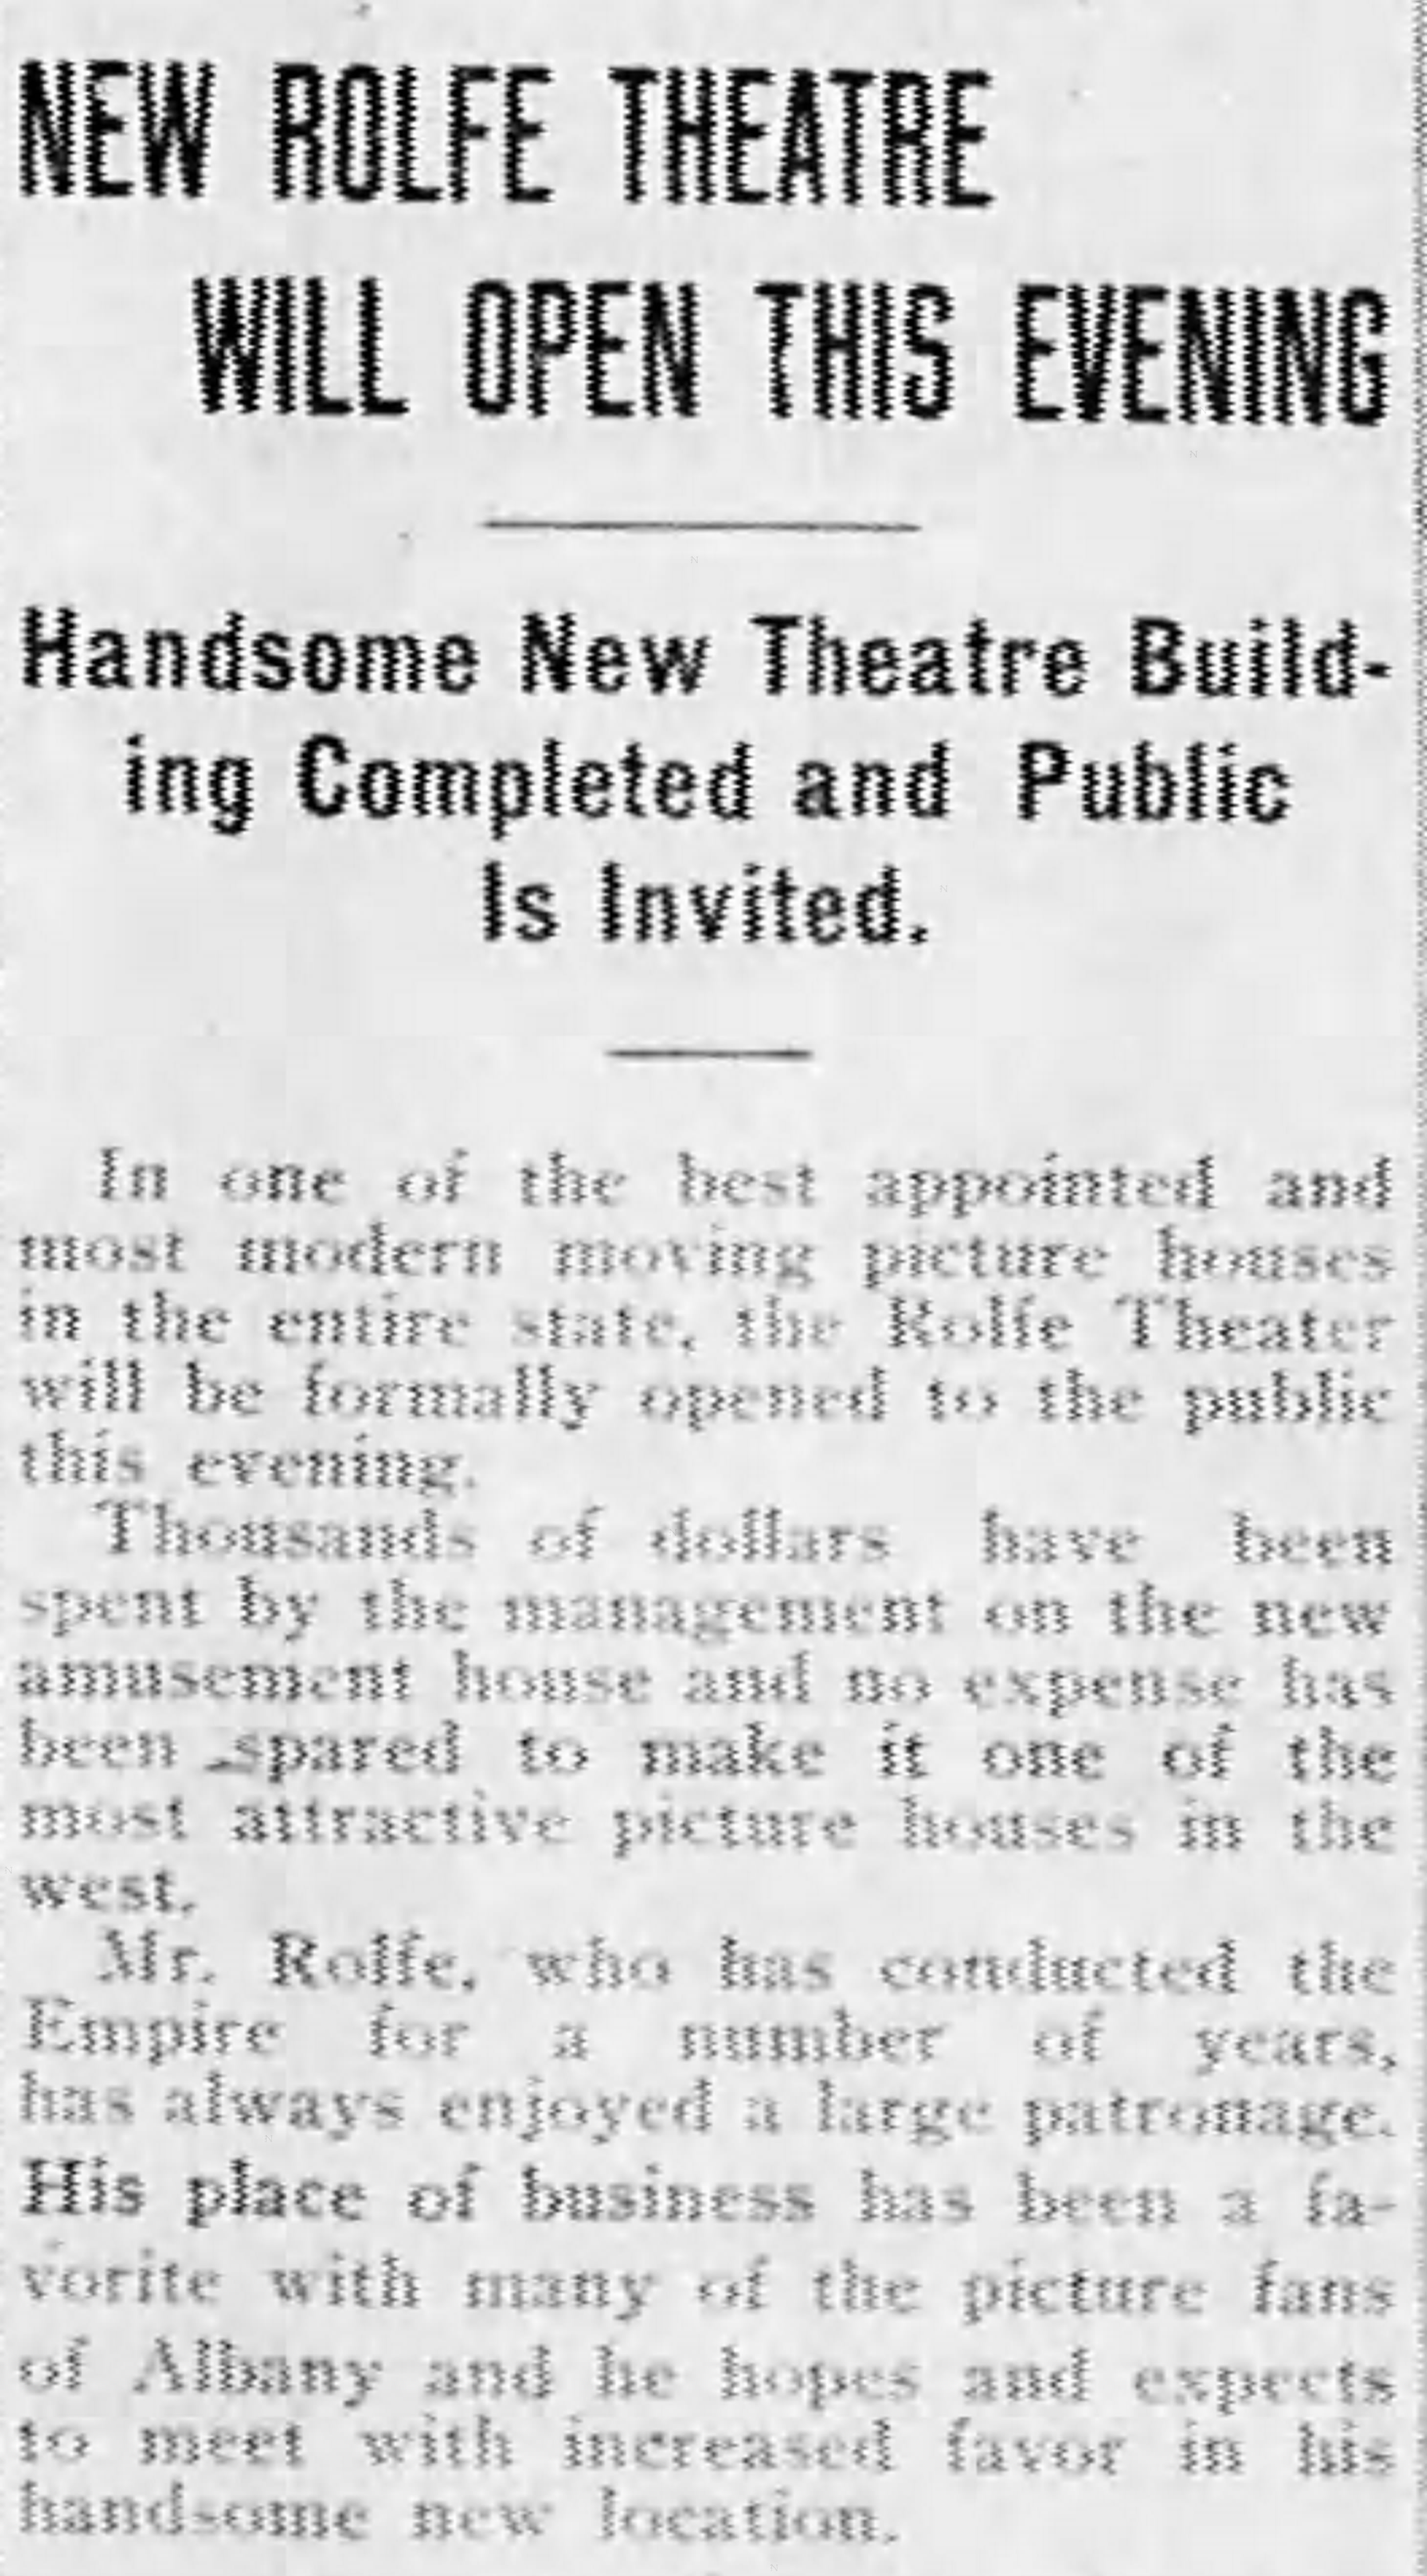 Rolfe Theater opens, 1913